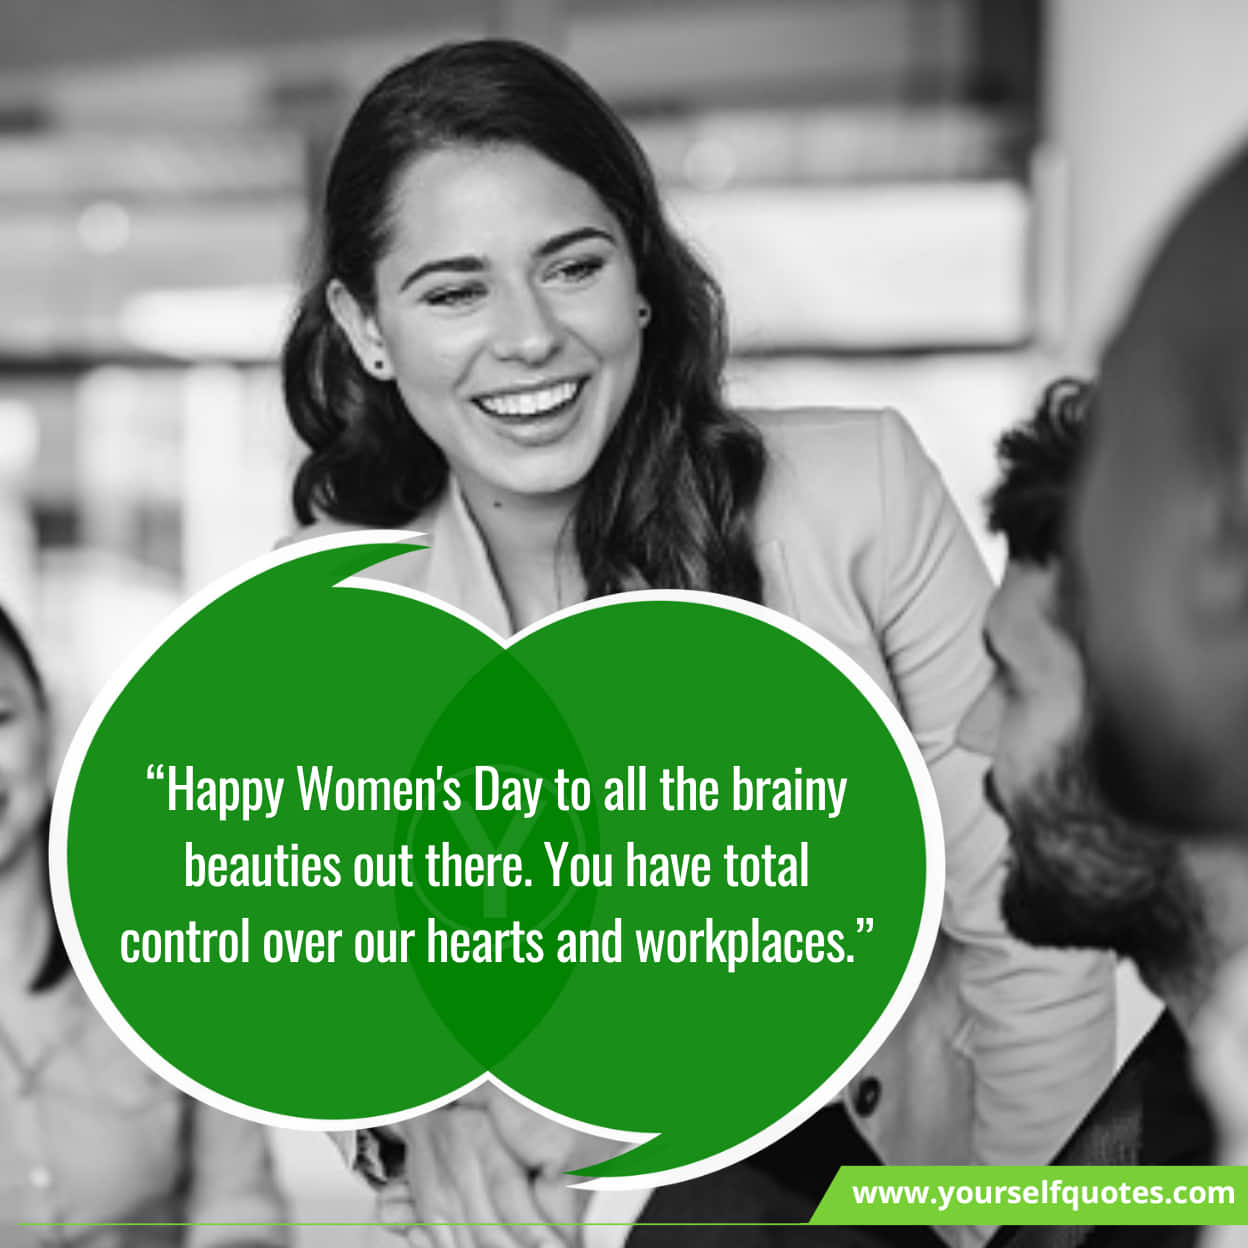 Inspirational Women's Day Wishes to Employees